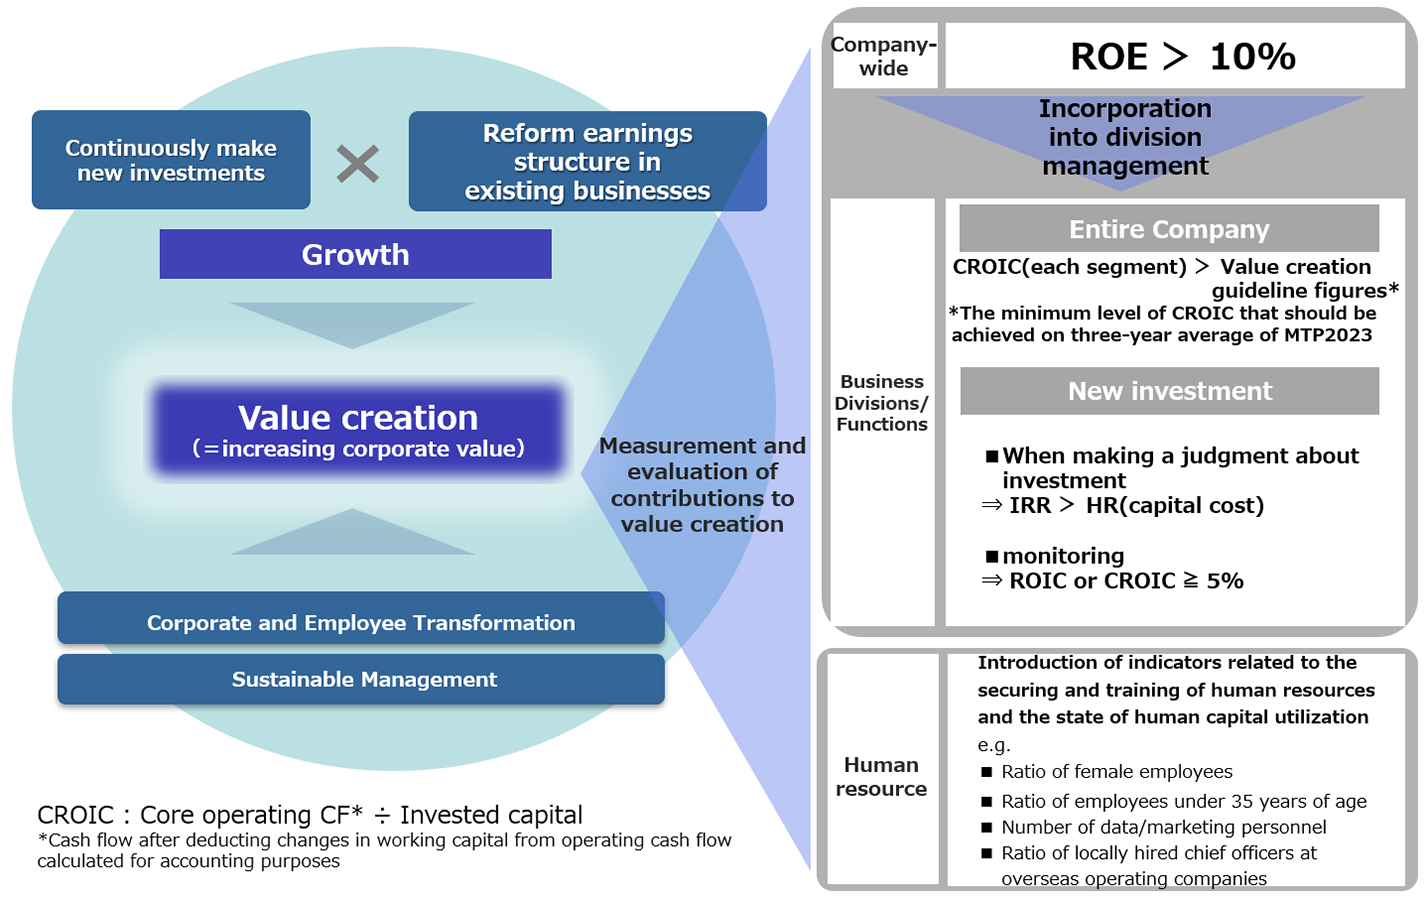 Value Creation Measurement and Evaluation